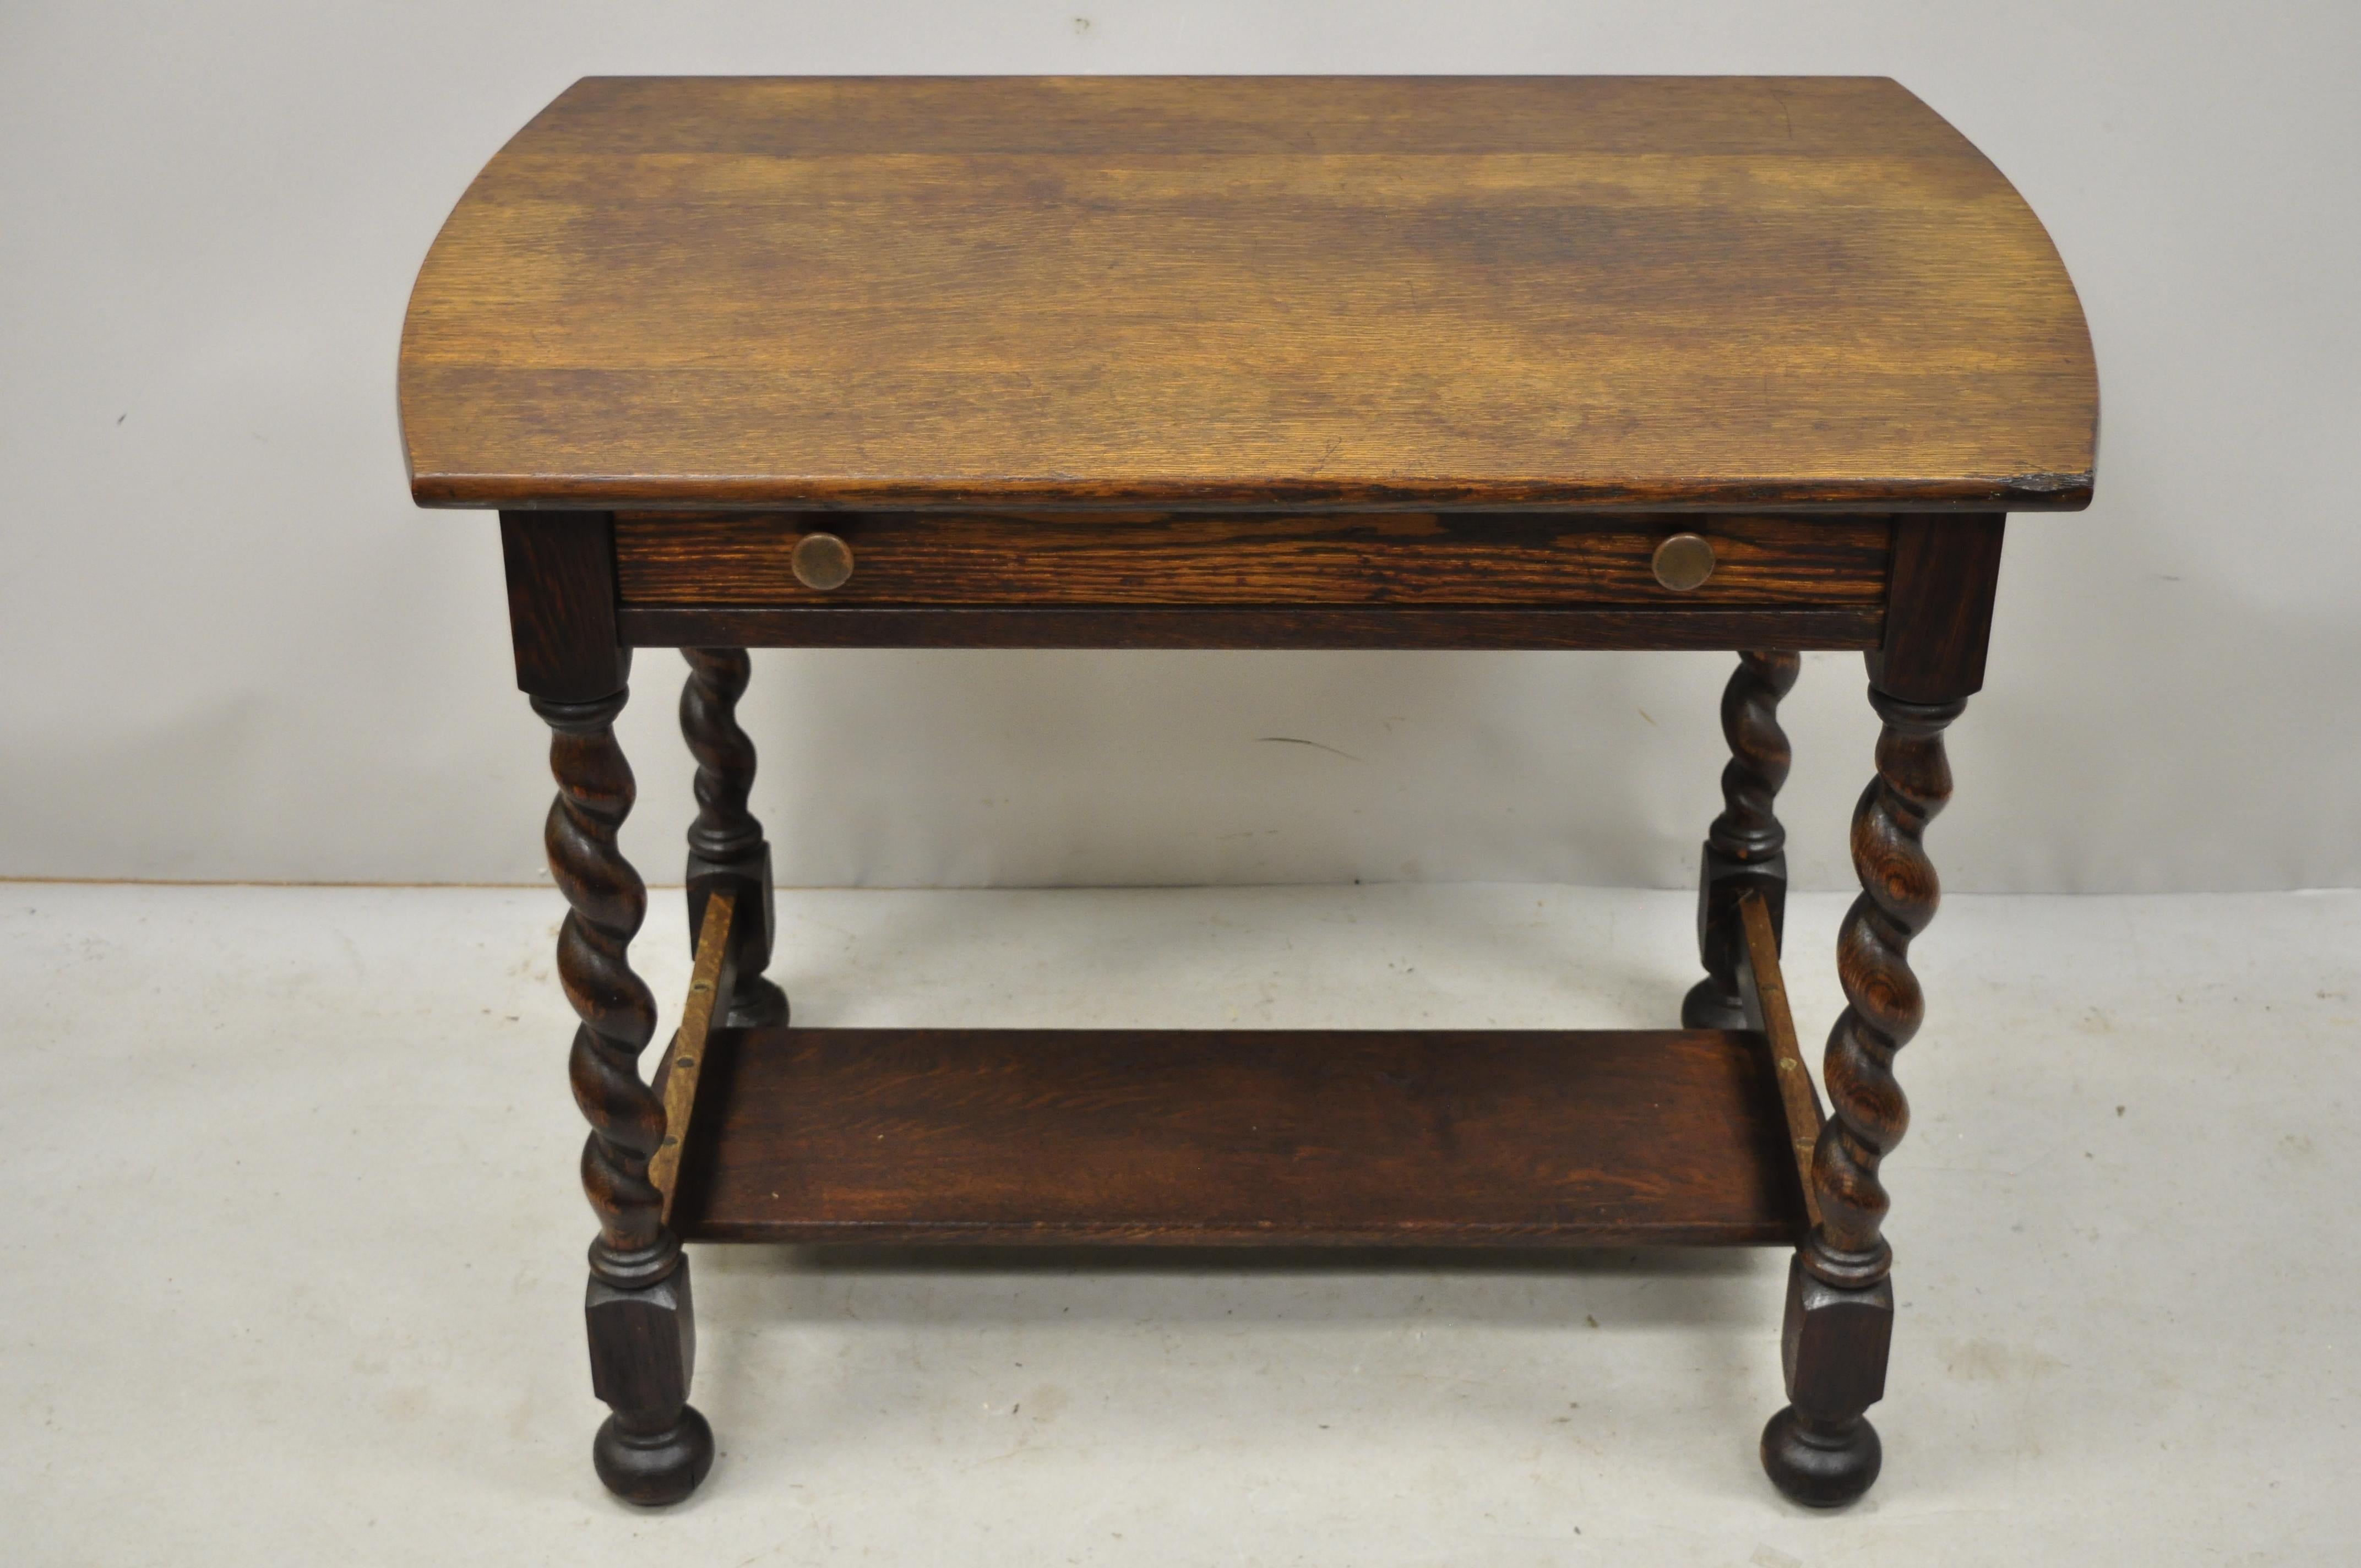 Antique oak English Jacobean spiral barley twist table desk with one drawer. Item features spiral carved barley twist legs, lower shelf, solid wood construction, beautiful wood grain, original label remnants, 1 drawer, very nice antique item, circa